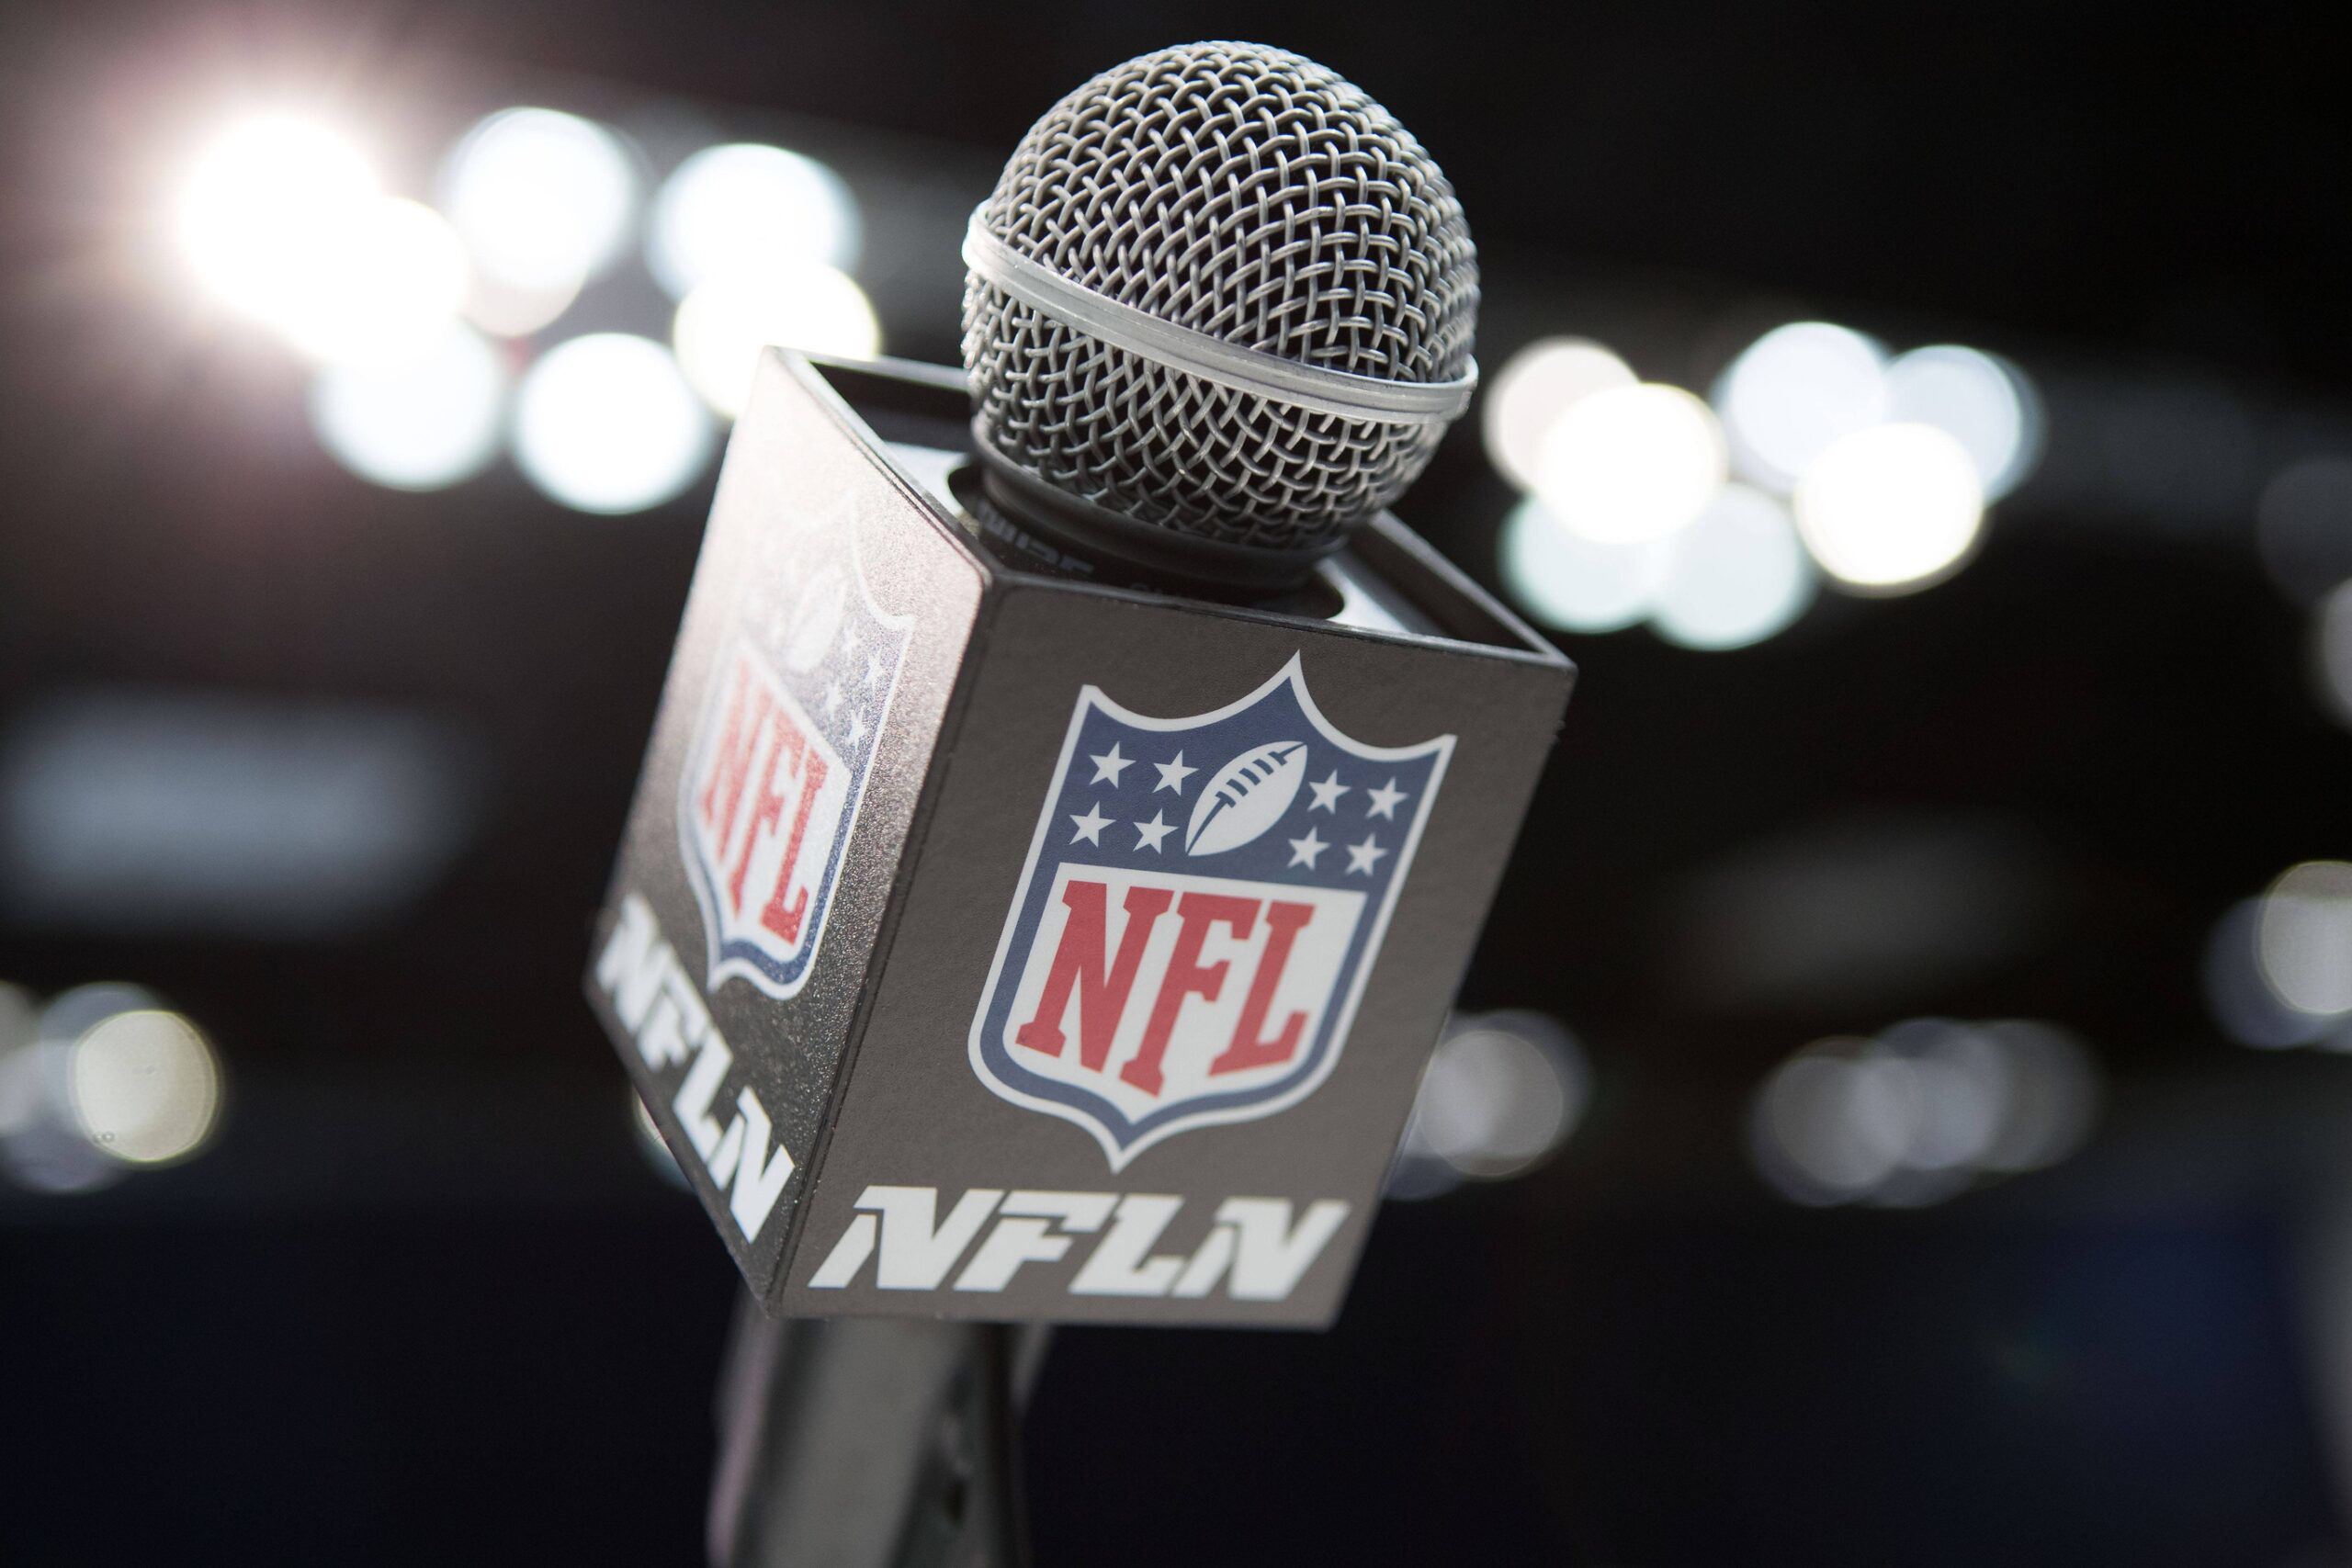 NFL Announcers Week 1 CBS and FOX NFL Game Assignments This Week